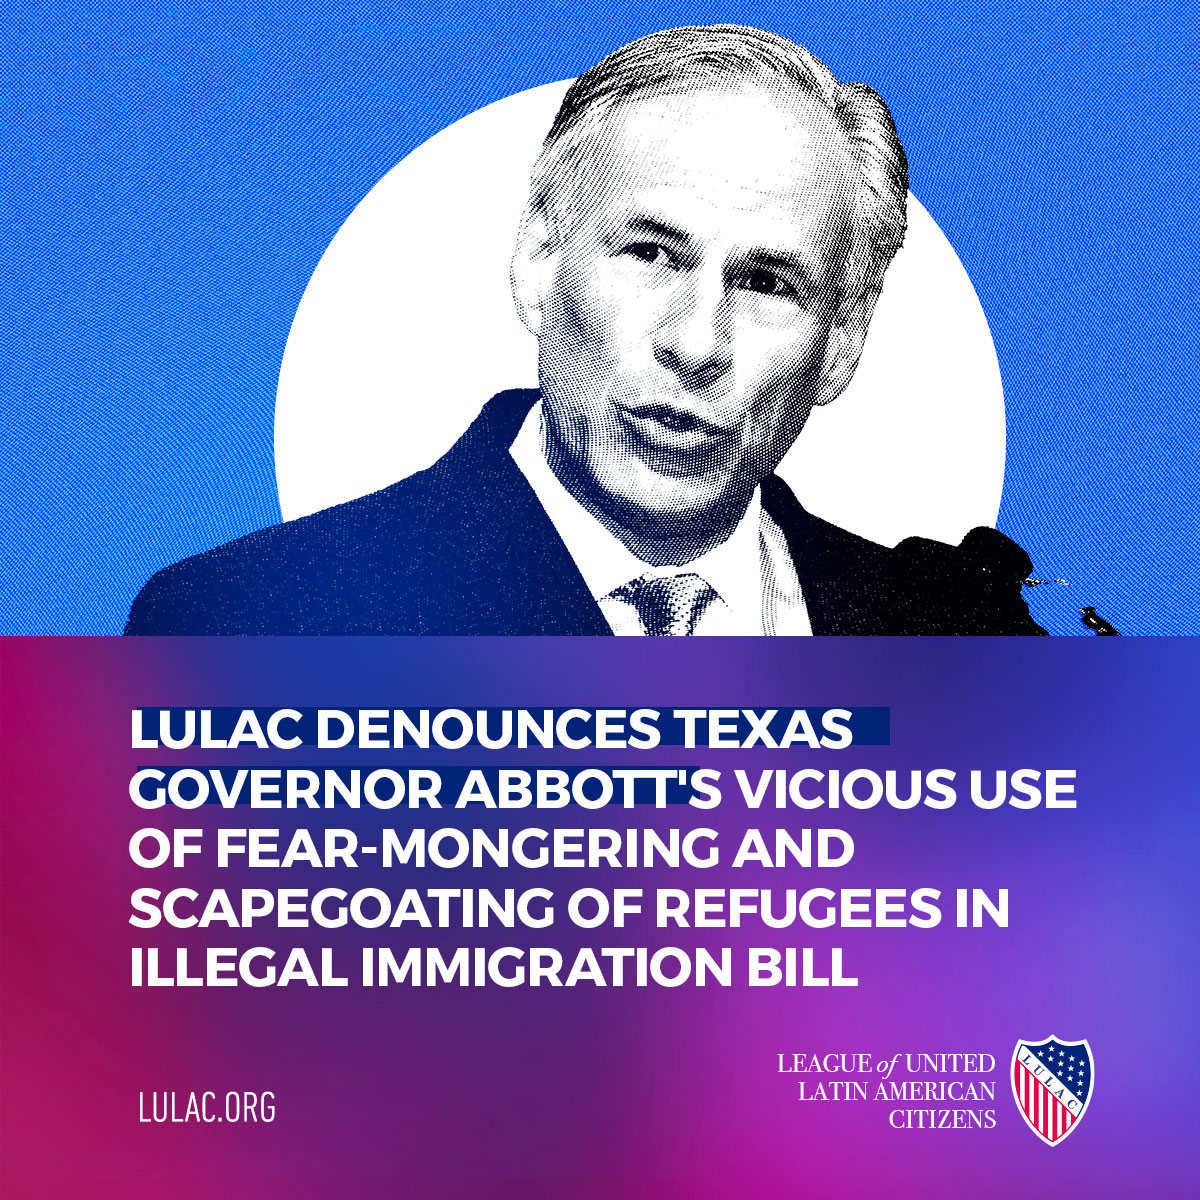 LULAC condemns Texas legislators' malicious and illegal actions, which constitute an outright assault on immigrant rights and our Constitution. Please read the press release at lulac.org/news #Abbott #Texas #LULAC #WashingtonDC #Latinos #Latinas